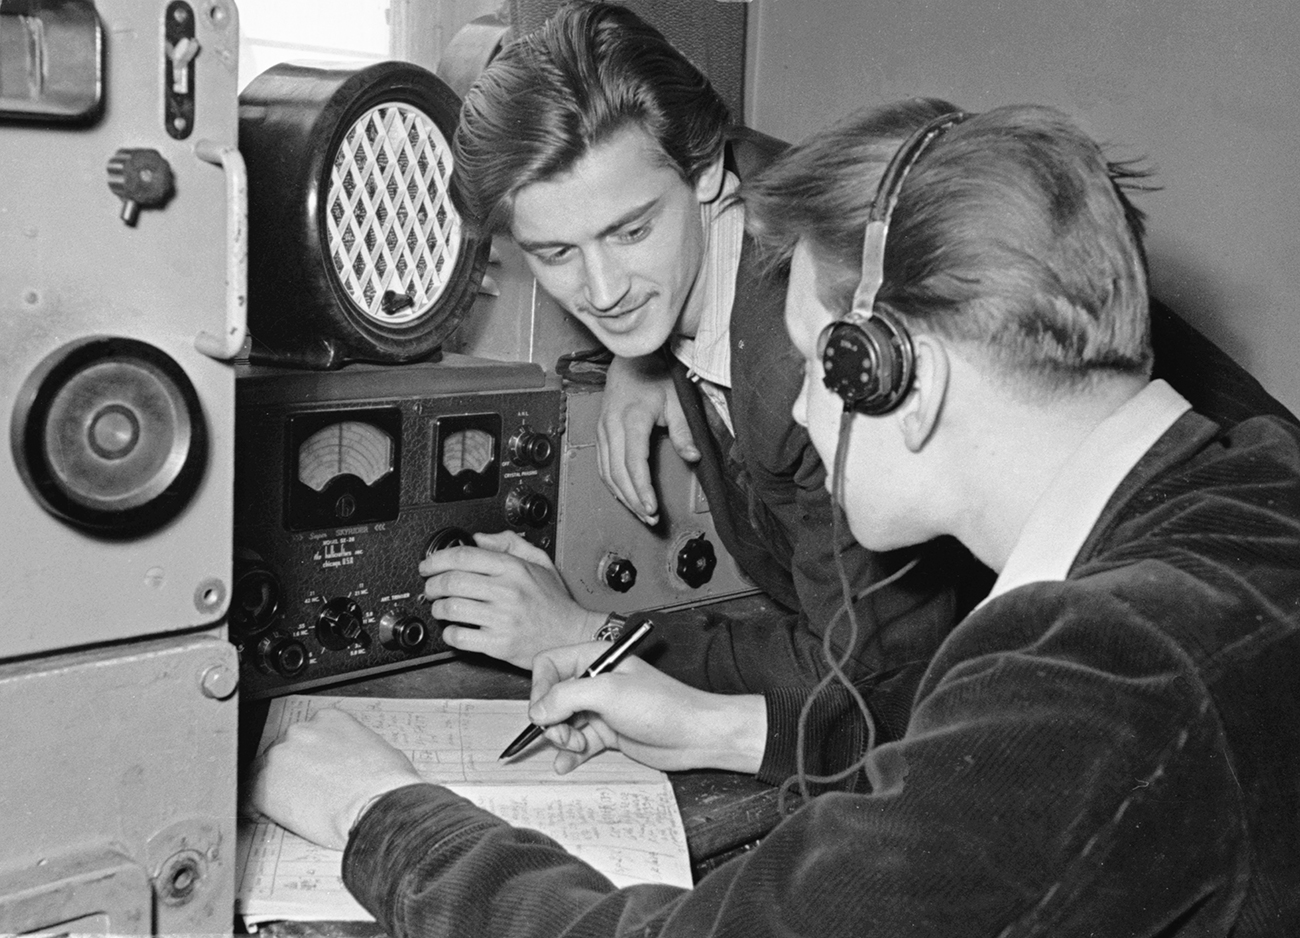 "Swing, early bebop and so on," recalled Pustyntsev. "I could not even go to sleep without first listening to the latest music program." Photo: Two men listen to radio in the Soviet Union on April 1, 1958. Source: TASS